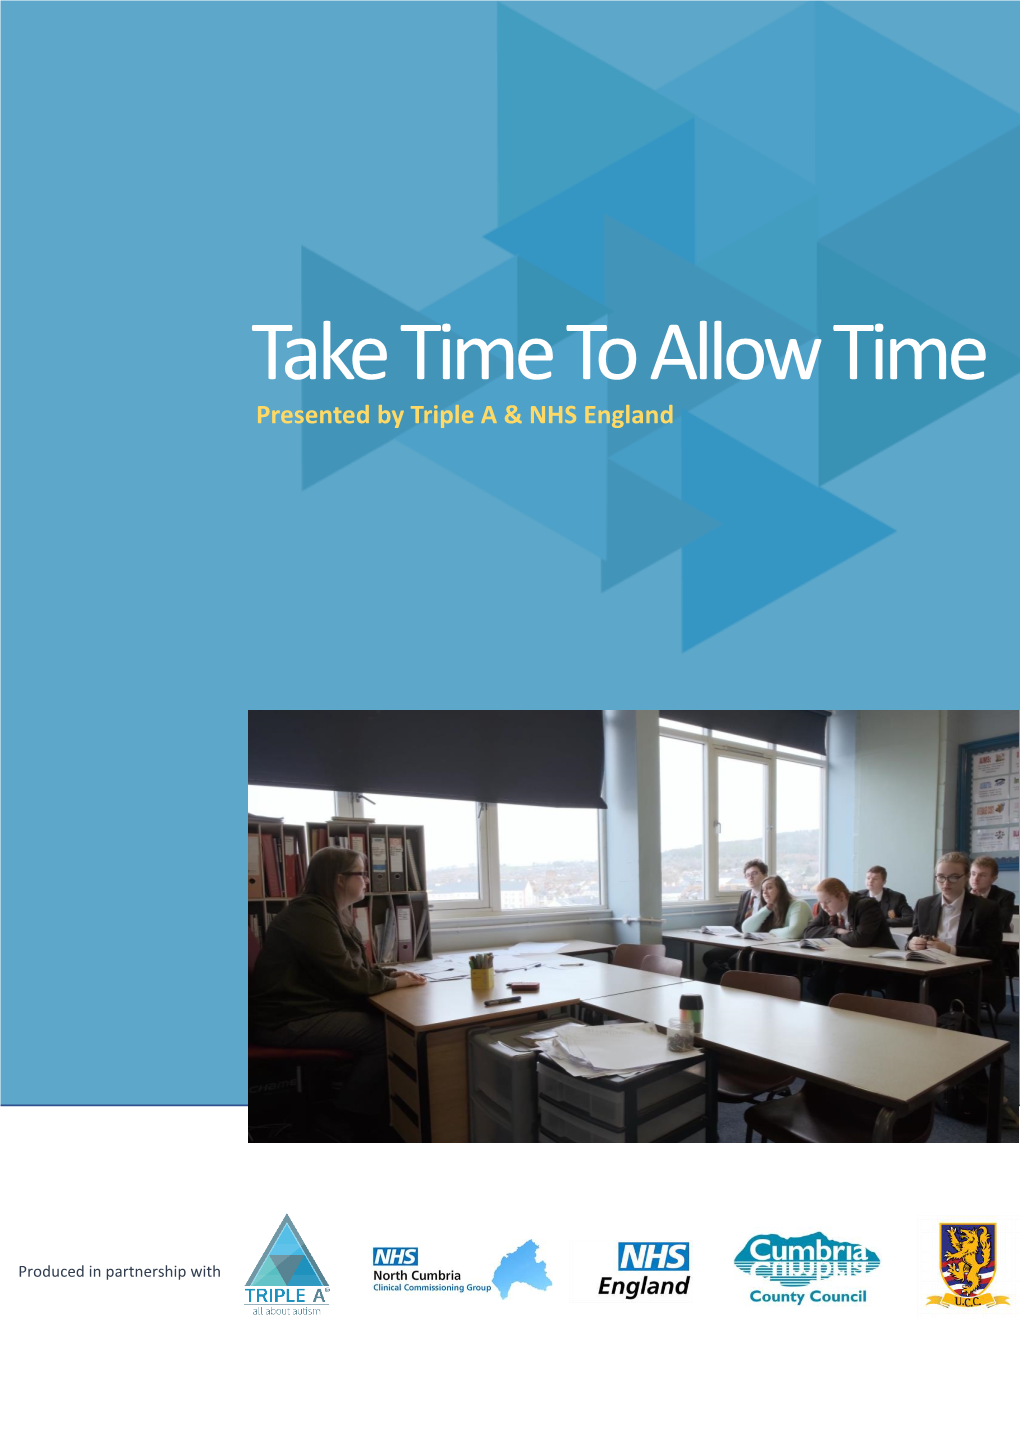 Take Time to Allow Time Presented by Triple a & NHS England